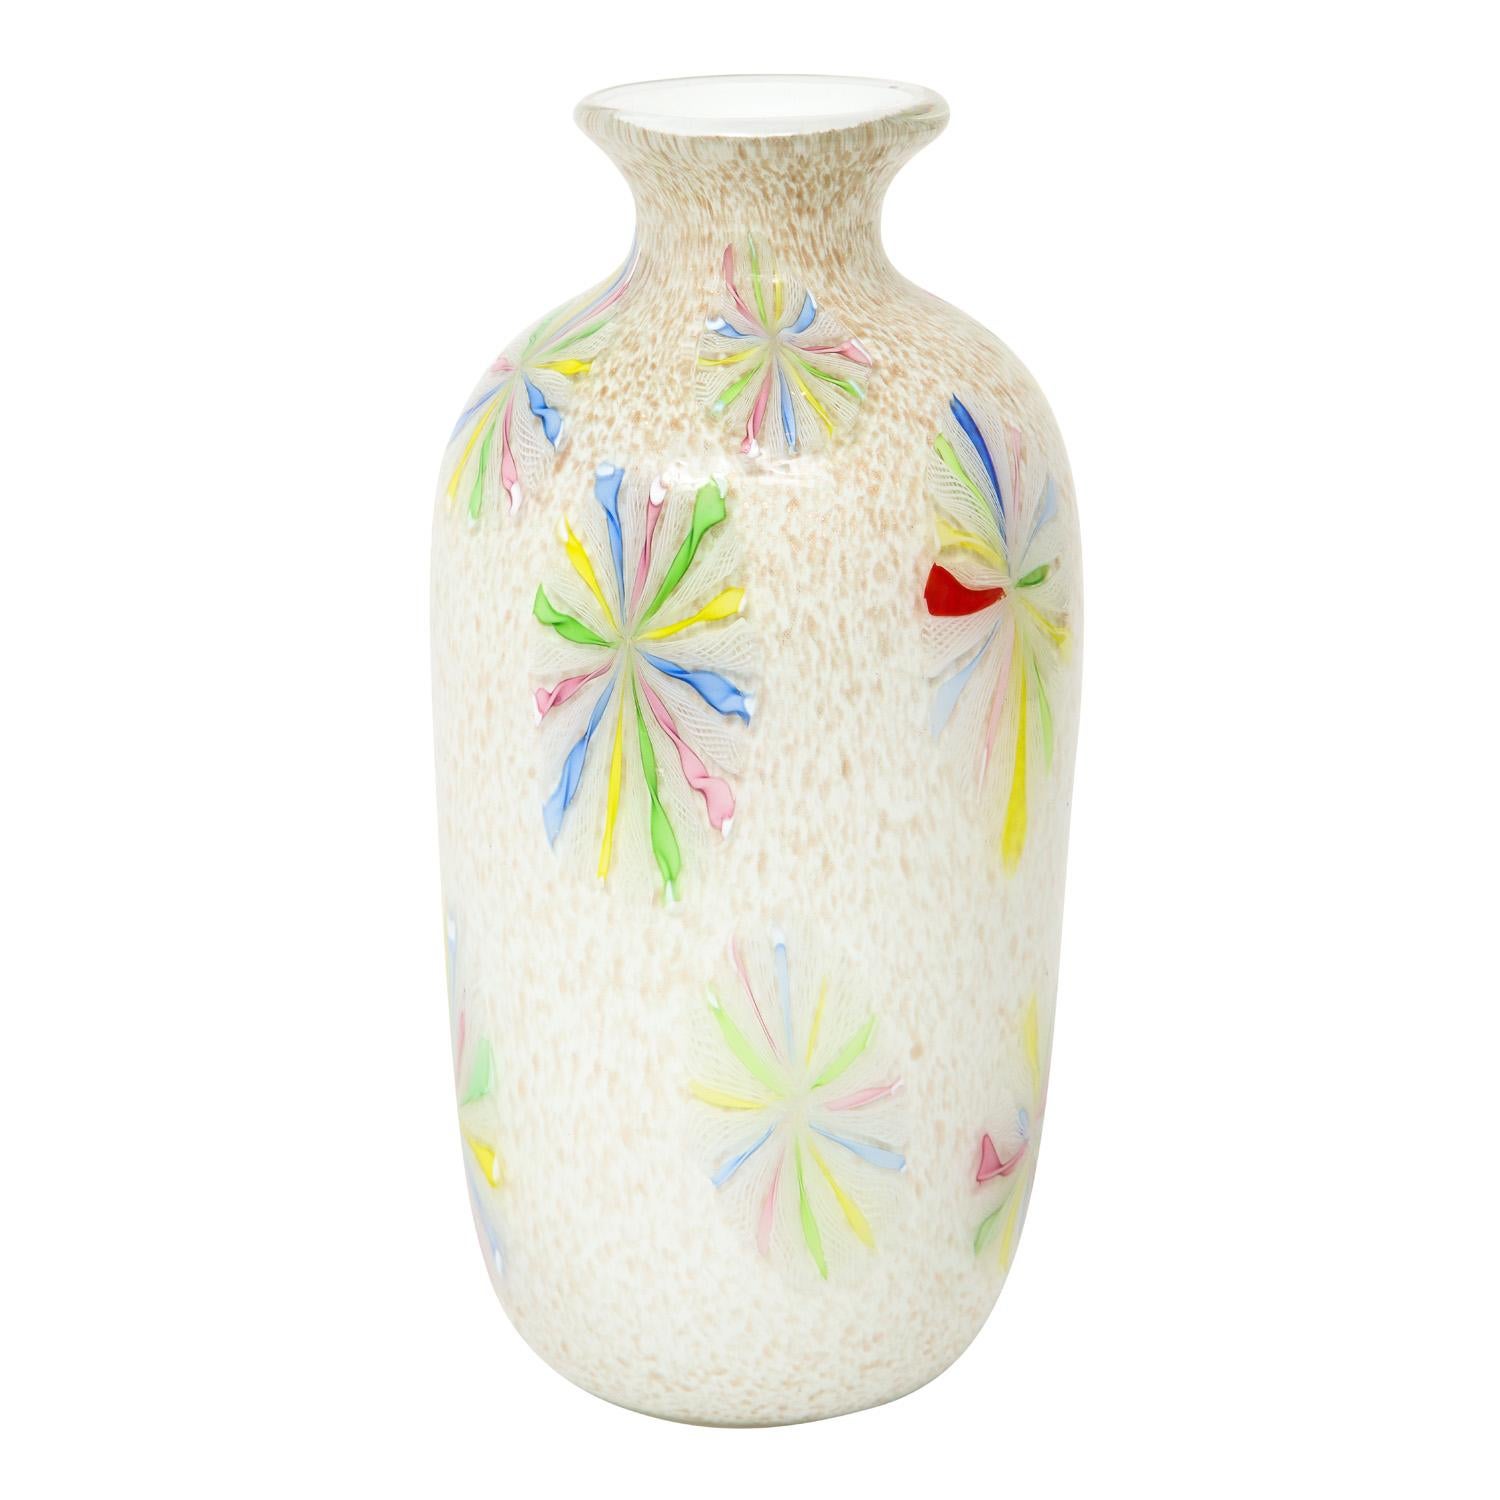 Hand-blown glass vase, colorful starburst murrhines over white glass with gold inclusions, by Arte Vetraria Muranese or A.V.E.M., Murano Italy, 1950's. This vase is like a jewel. The gold inclusions sparkle inside the glass.

Provenance: 
Evan